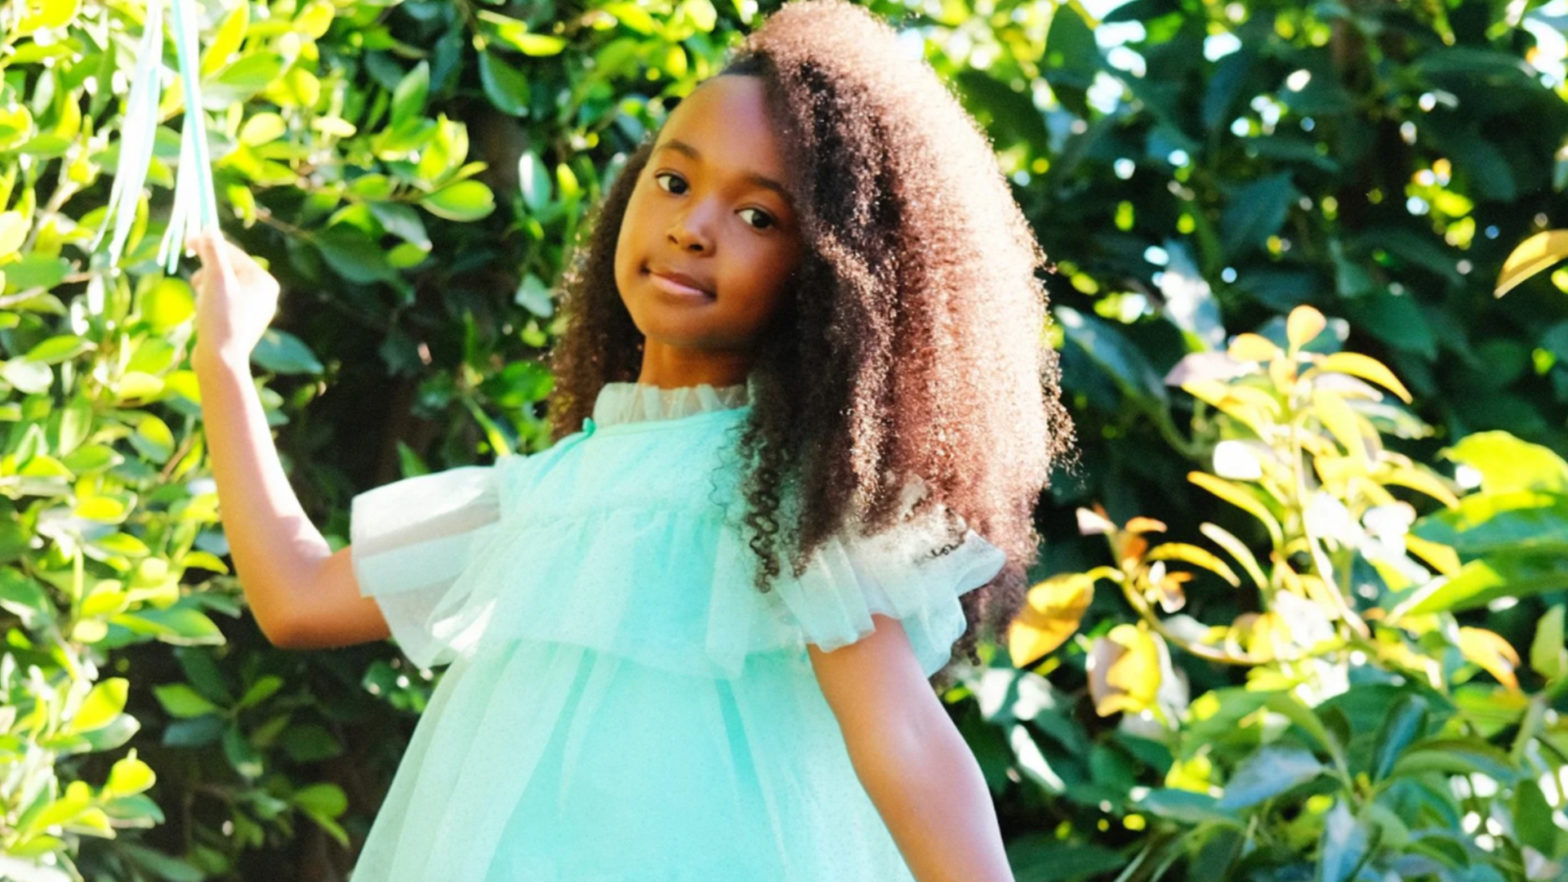 With 208K YouTube Subscribers And A New Janie And Jack Campaign, Zhuri James Is A Busy Princess